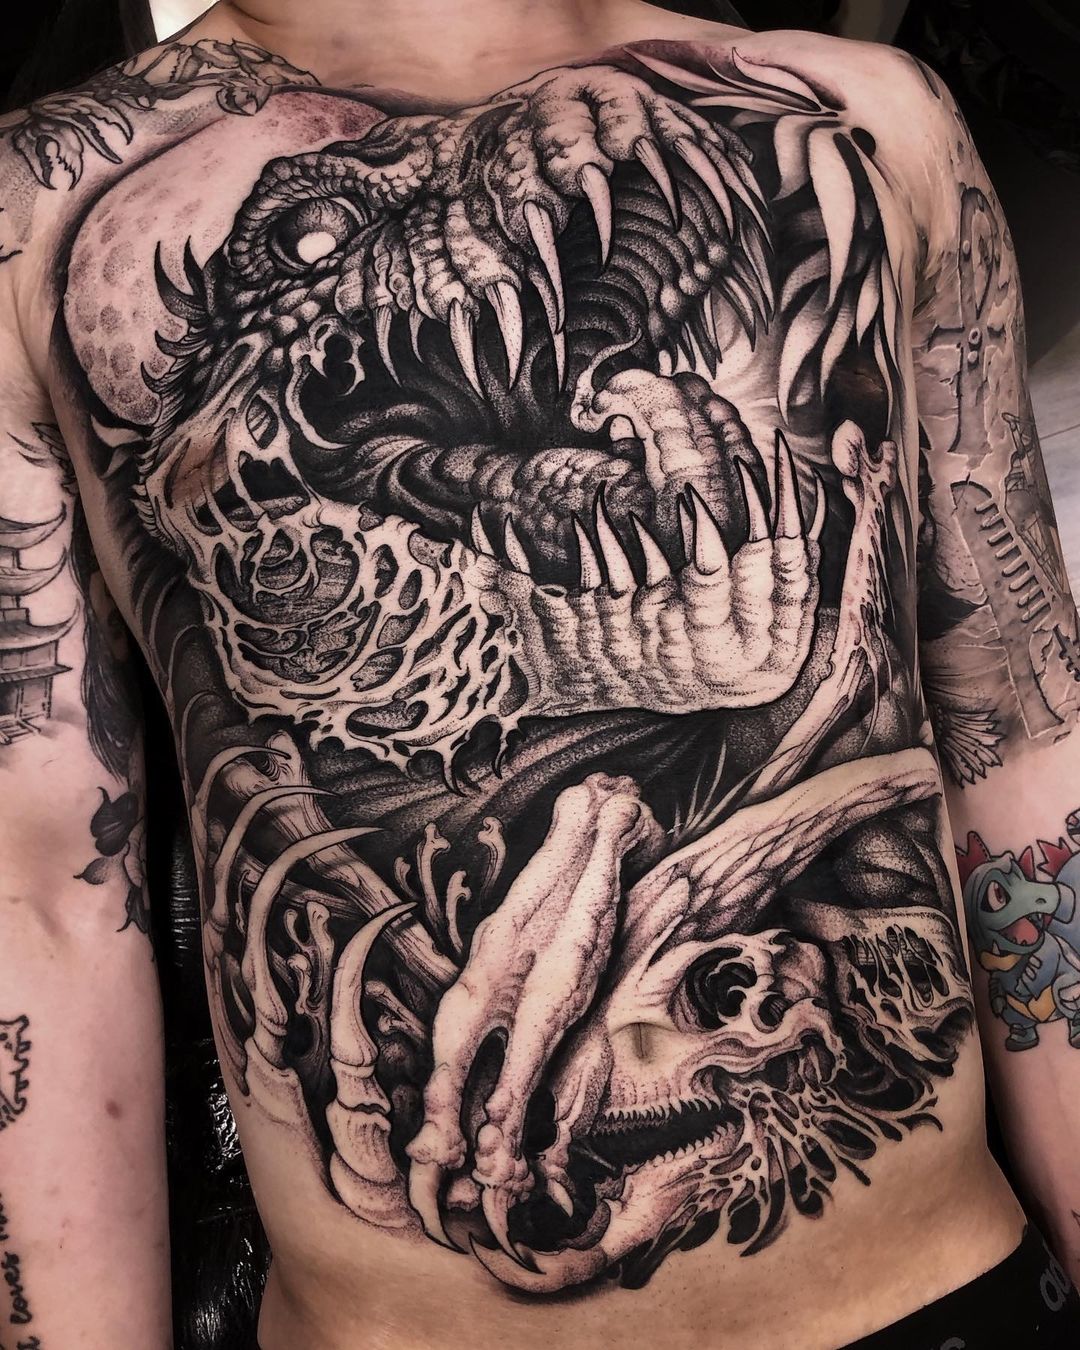 Dark and beautiful tattoos by Andre Fantini | iNKPPL